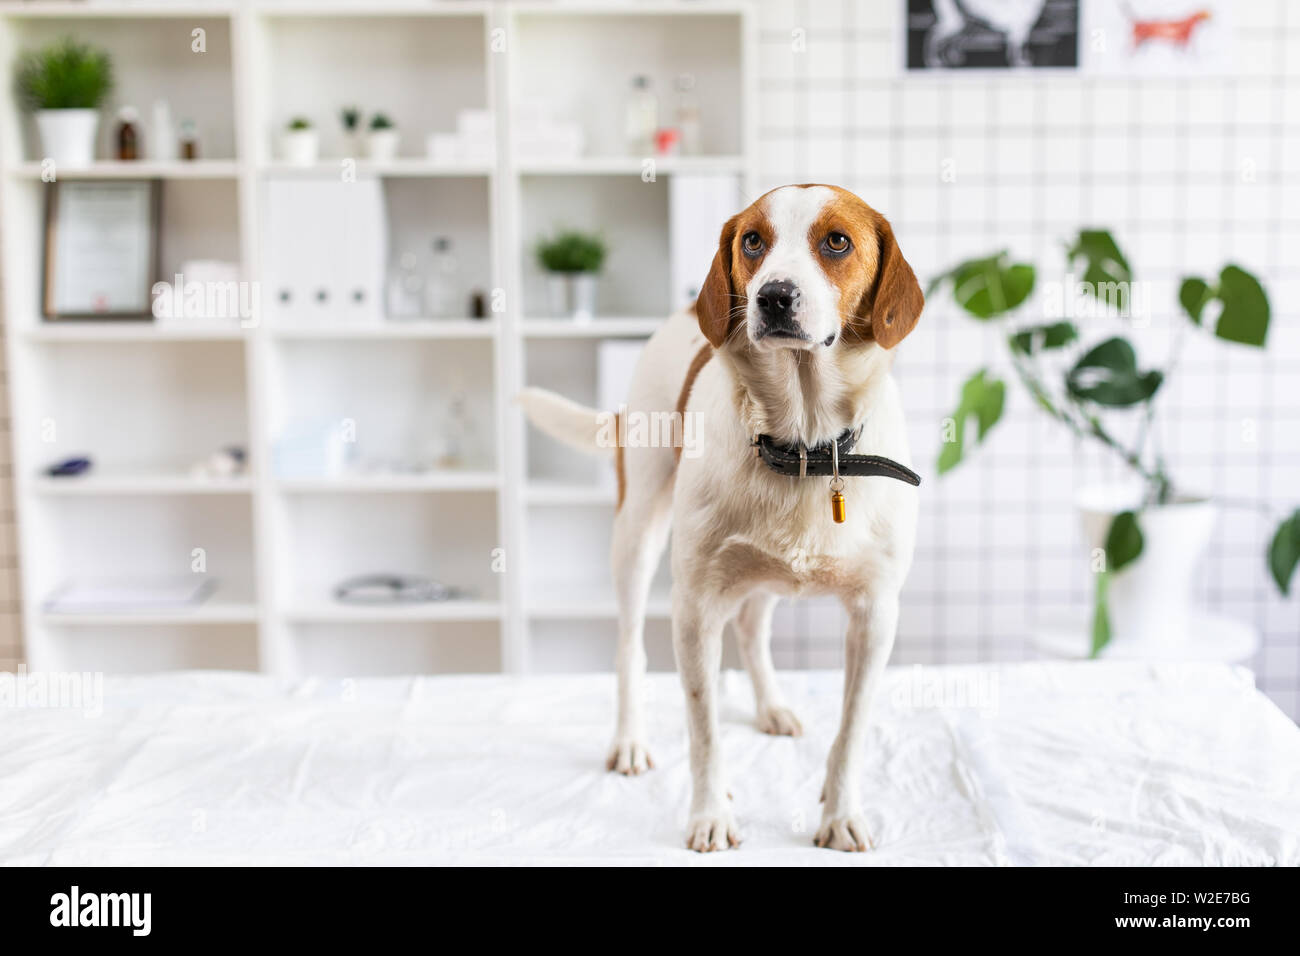 Dog waiting for a doctor in a veterinary clinic on the table. Blurred background of veterinary clinic. Stock Photo